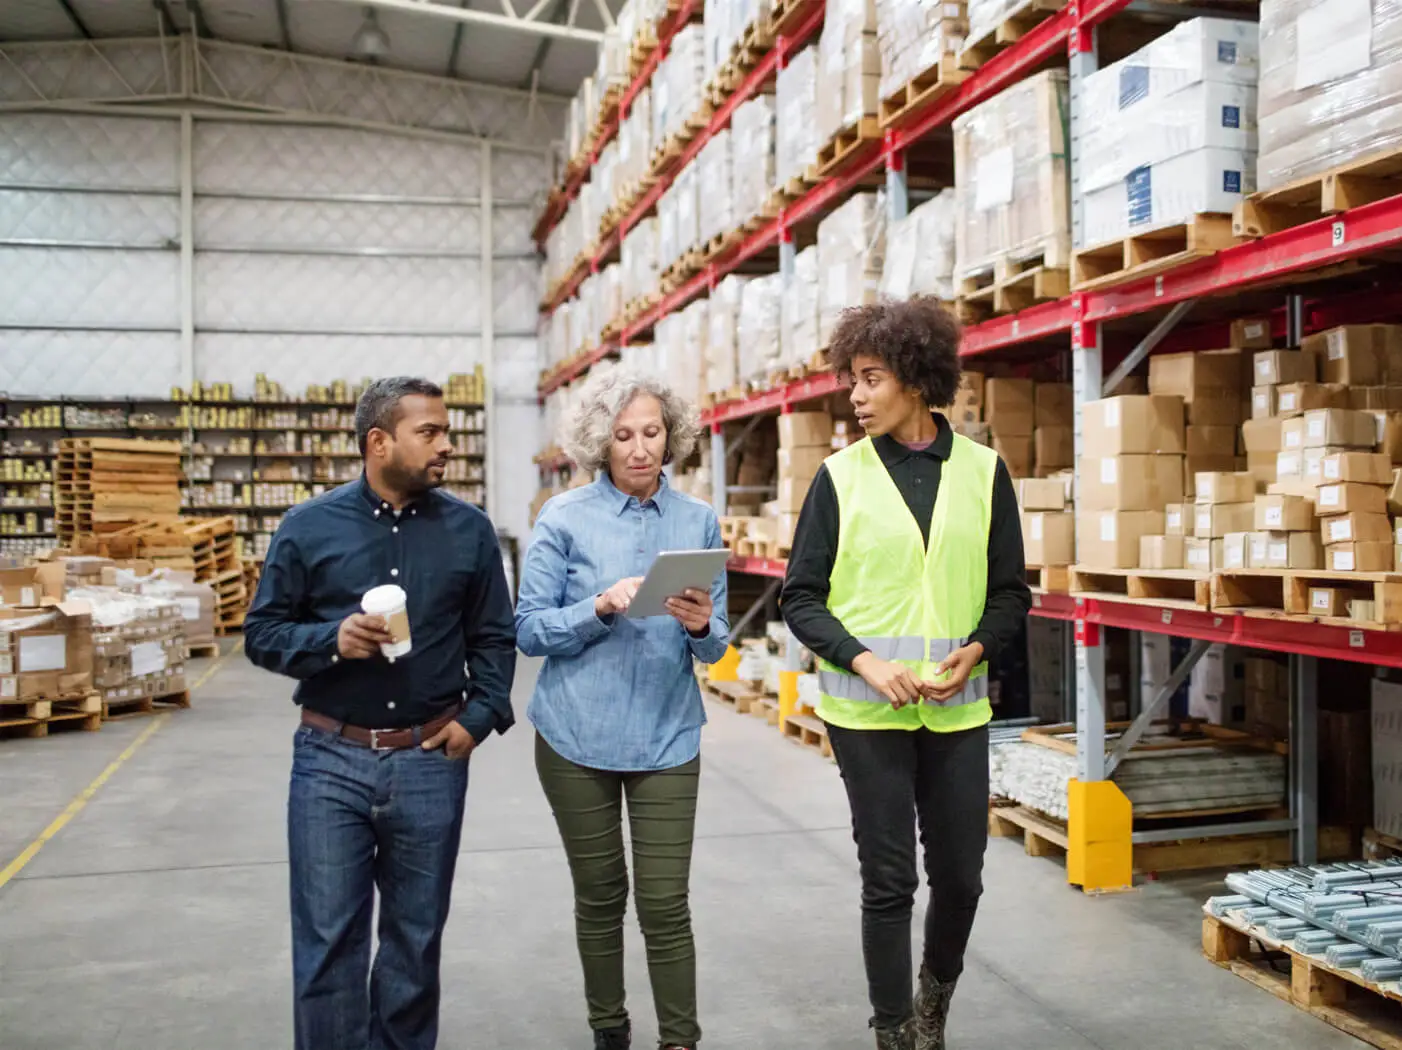 Three people in a warehouse walk while in discussion